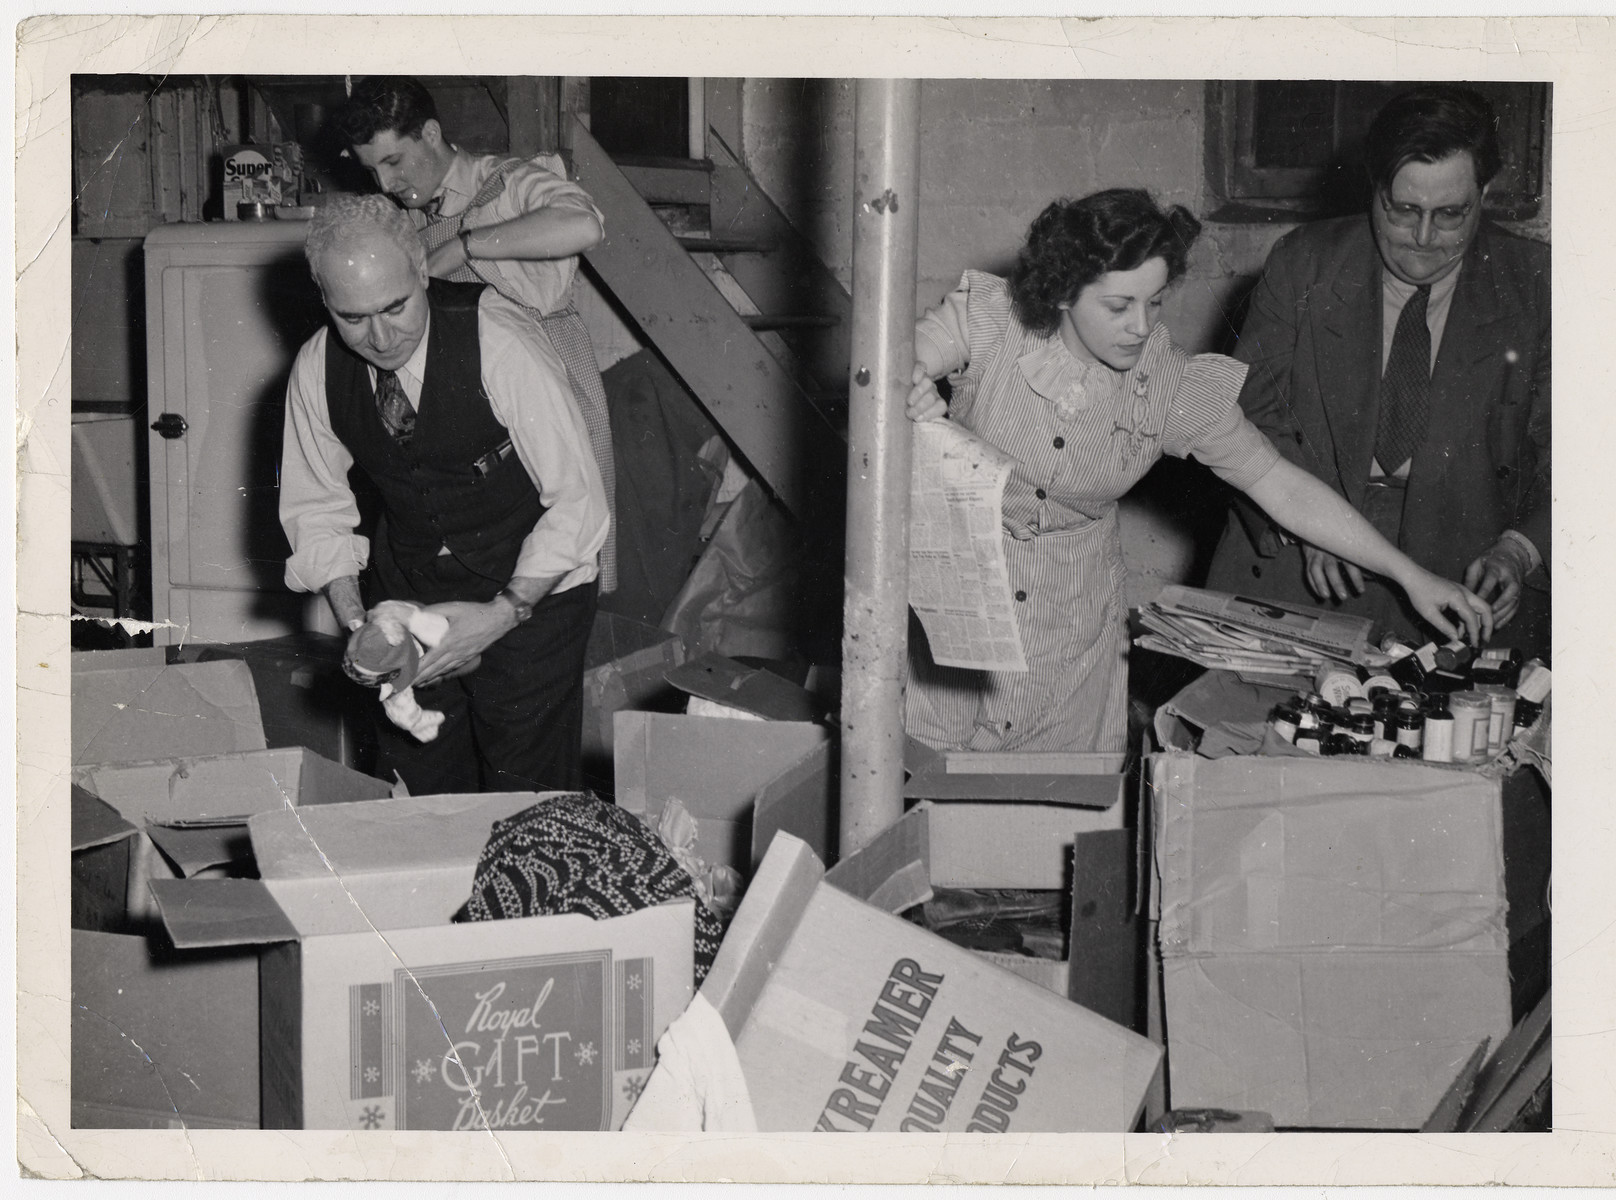 Maurice Levitt (front left) and three other members of the Frankfurt Jewish GI Council unpack boxes of supplies sent by the American Jewish community to aid displaced persons.